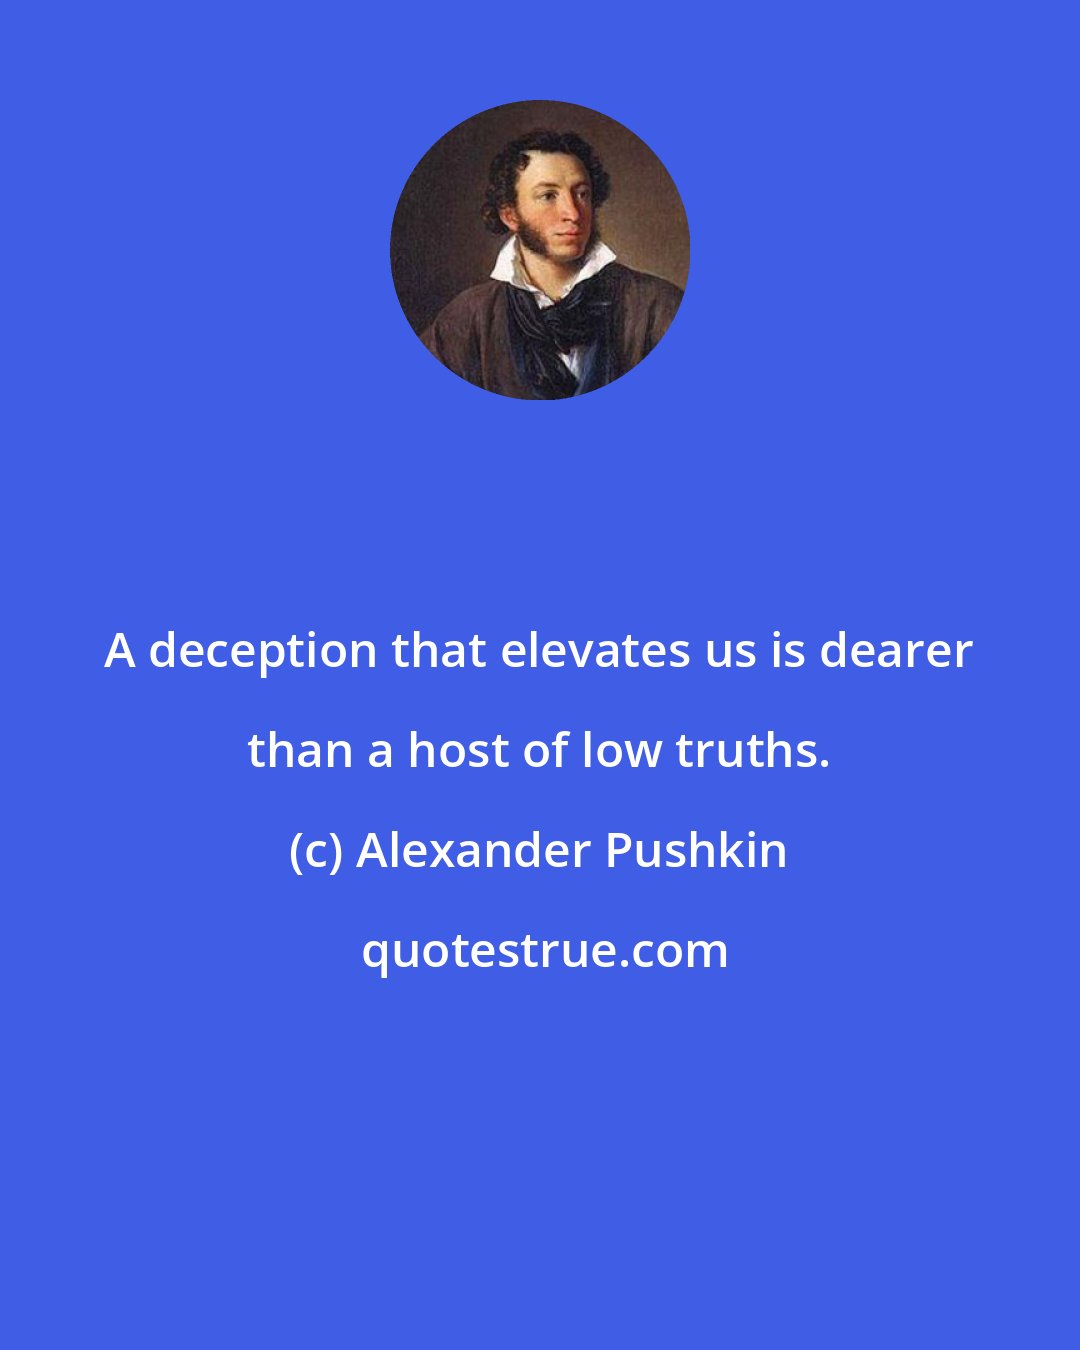 Alexander Pushkin: A deception that elevates us is dearer than a host of low truths.